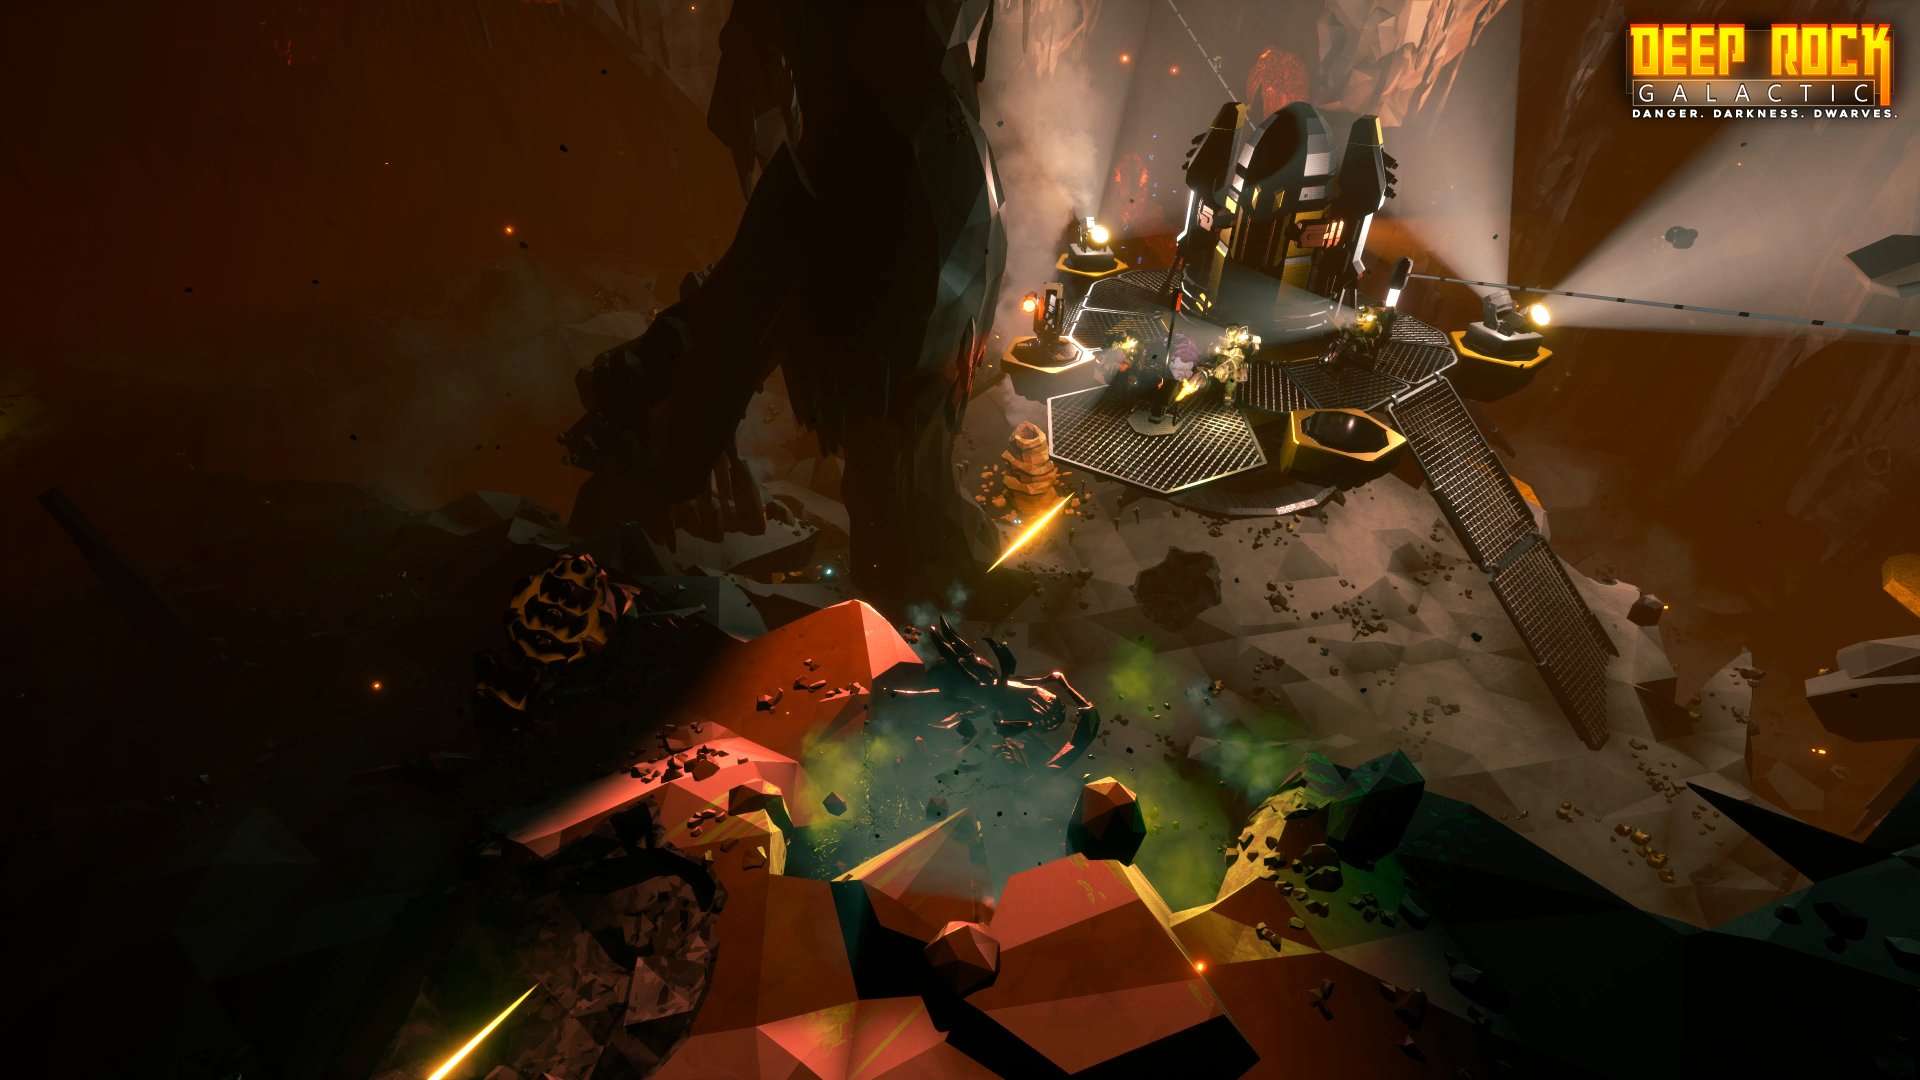 Console Launch Exclusive Deep Rock Galactic Arrives on Xbox One and Windows 10 This Month